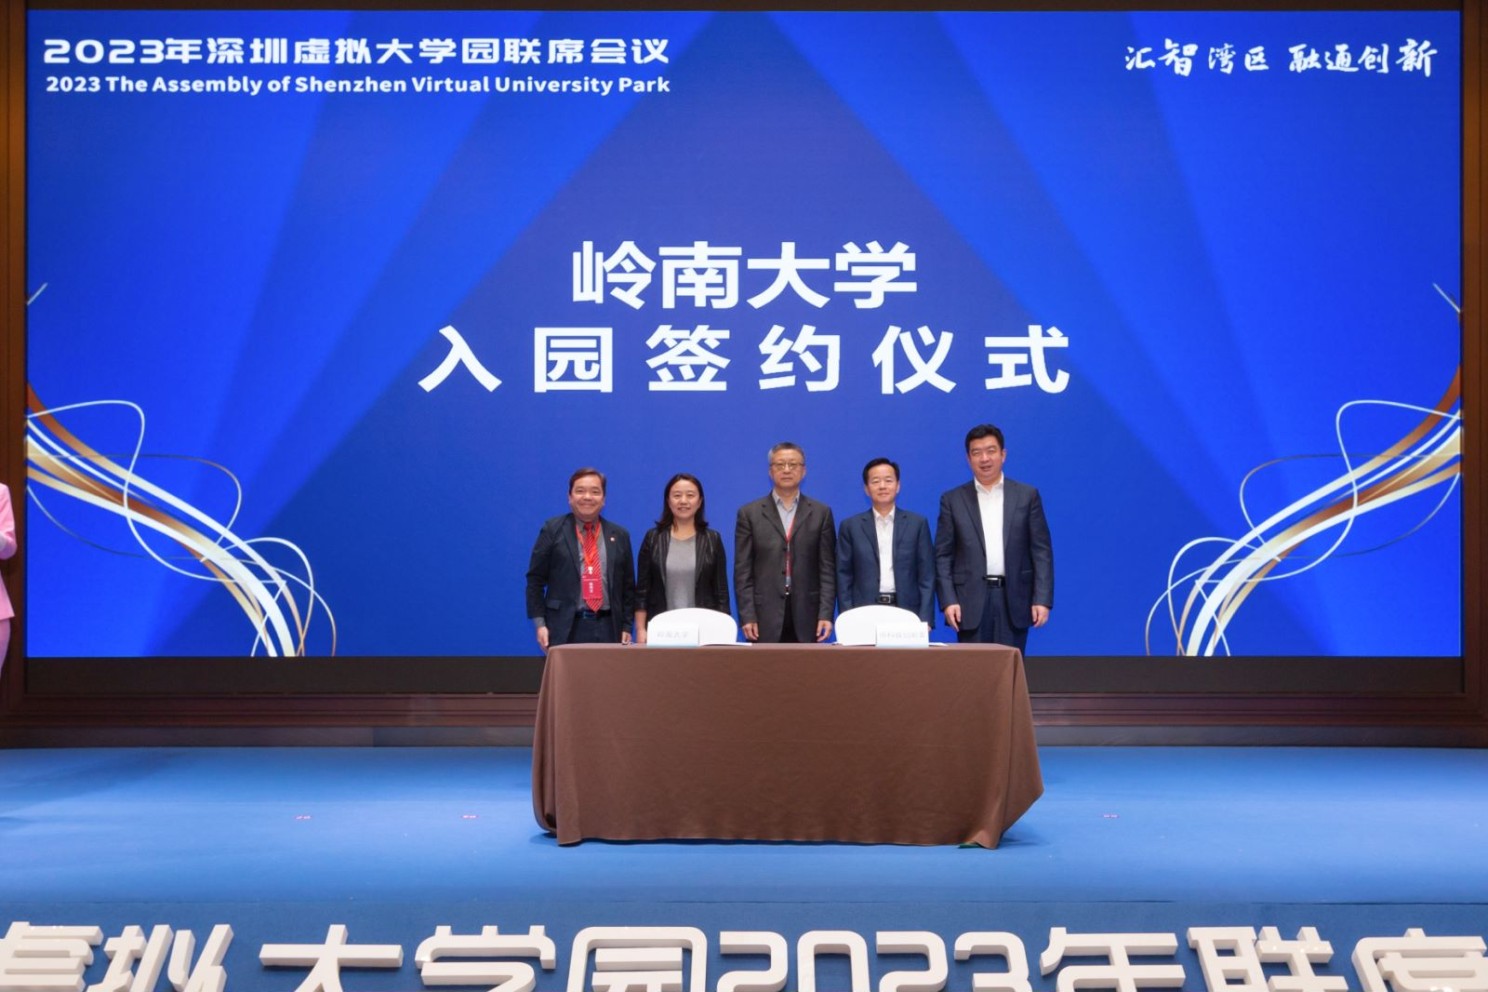 Lingnan University and the Shenzhen Technology and Innovation Commission sign an agreement and announce that Lingnan University will officially become a member of the Shenzhen Virtual University Park.